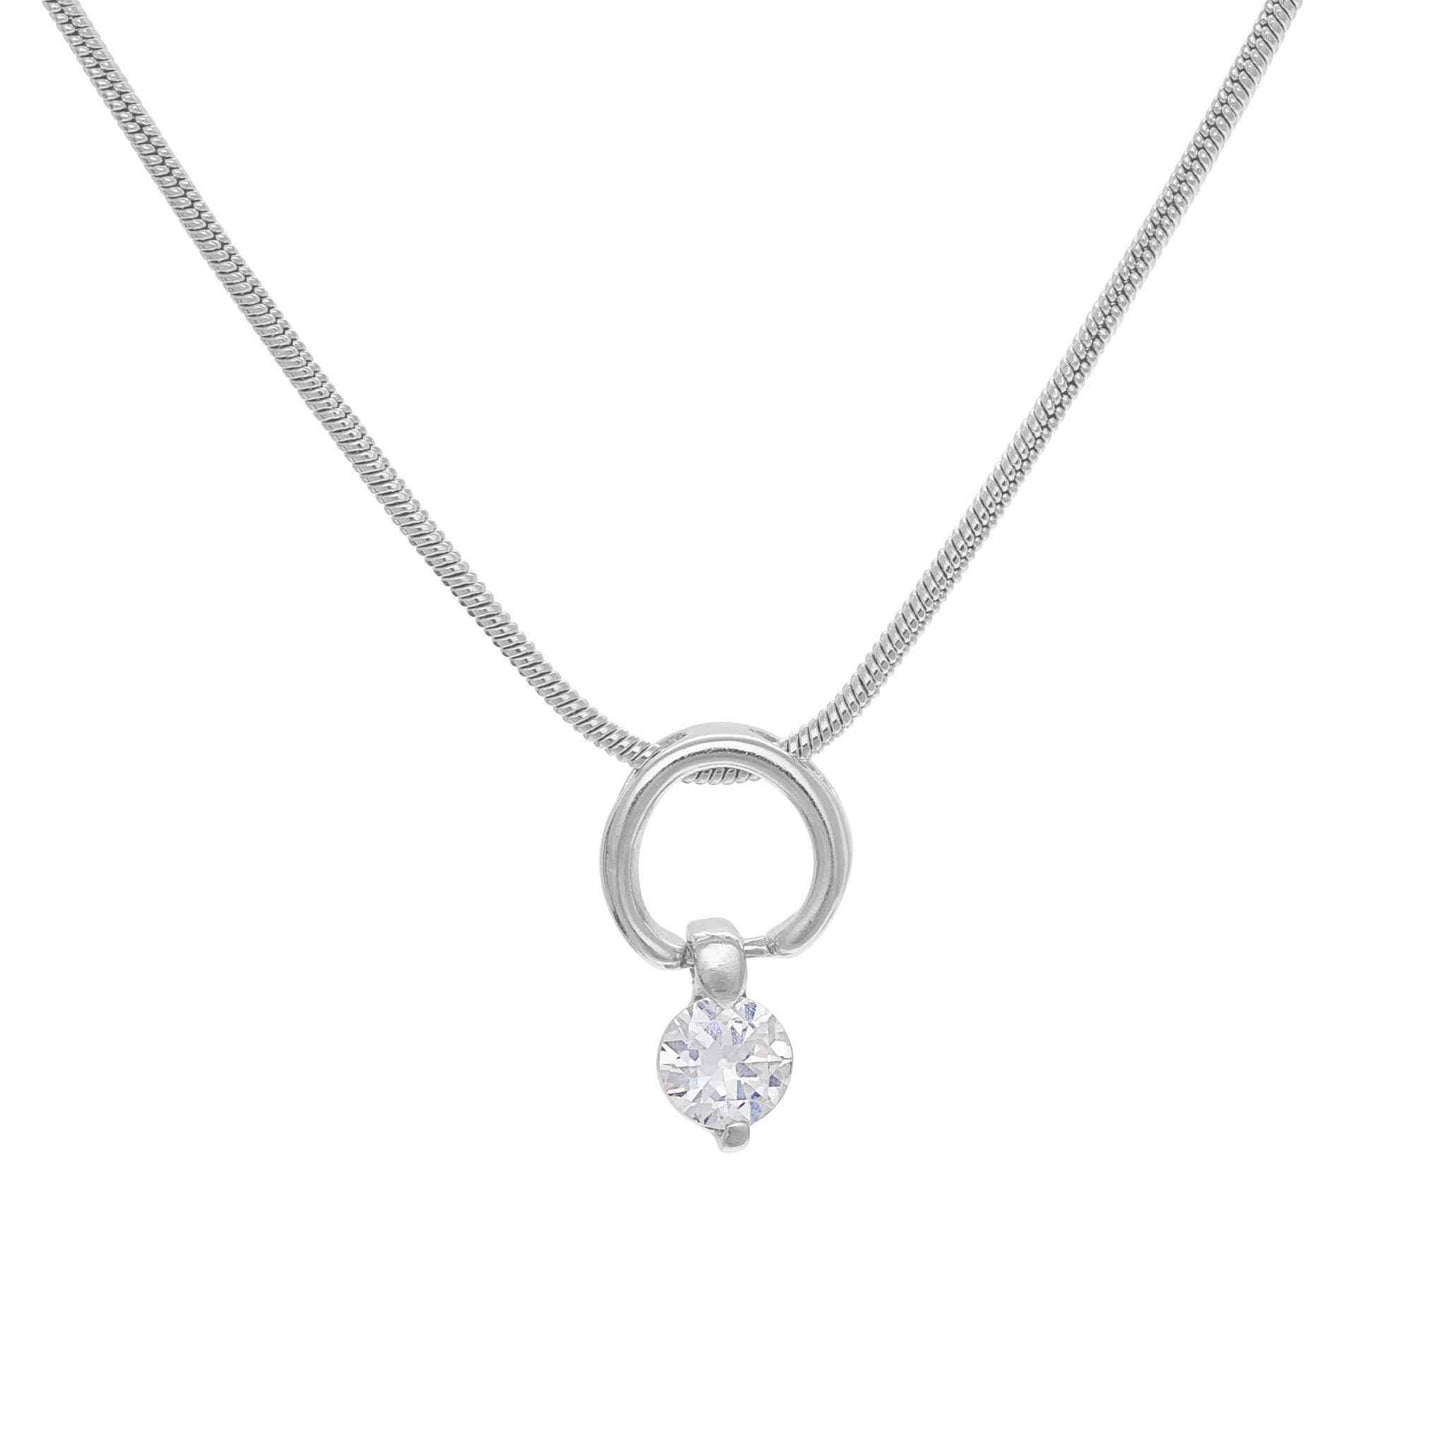 A round necklace with hanging round simulated diamond displayed on a neutral white background.